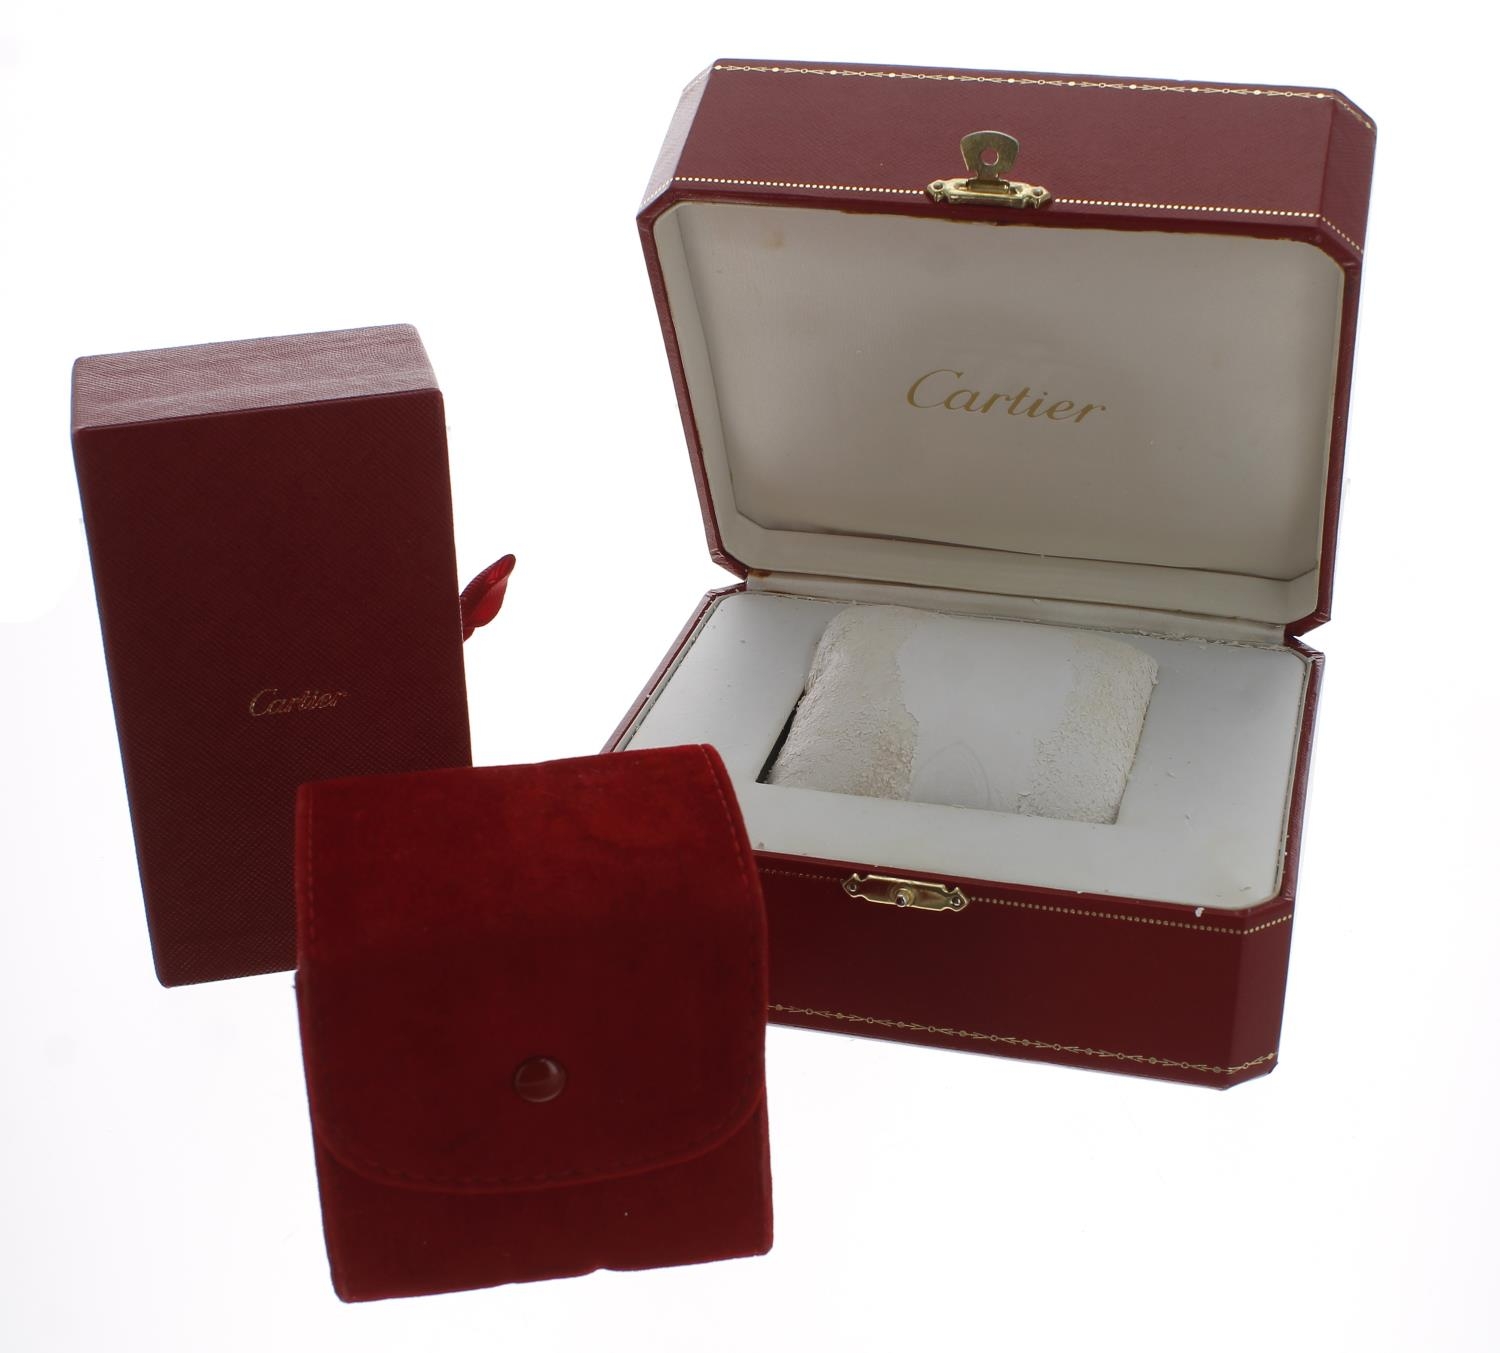 Cartier - Lotion for Jewellery and Watches, with brush and cloth, within a Cartier box with booklet;